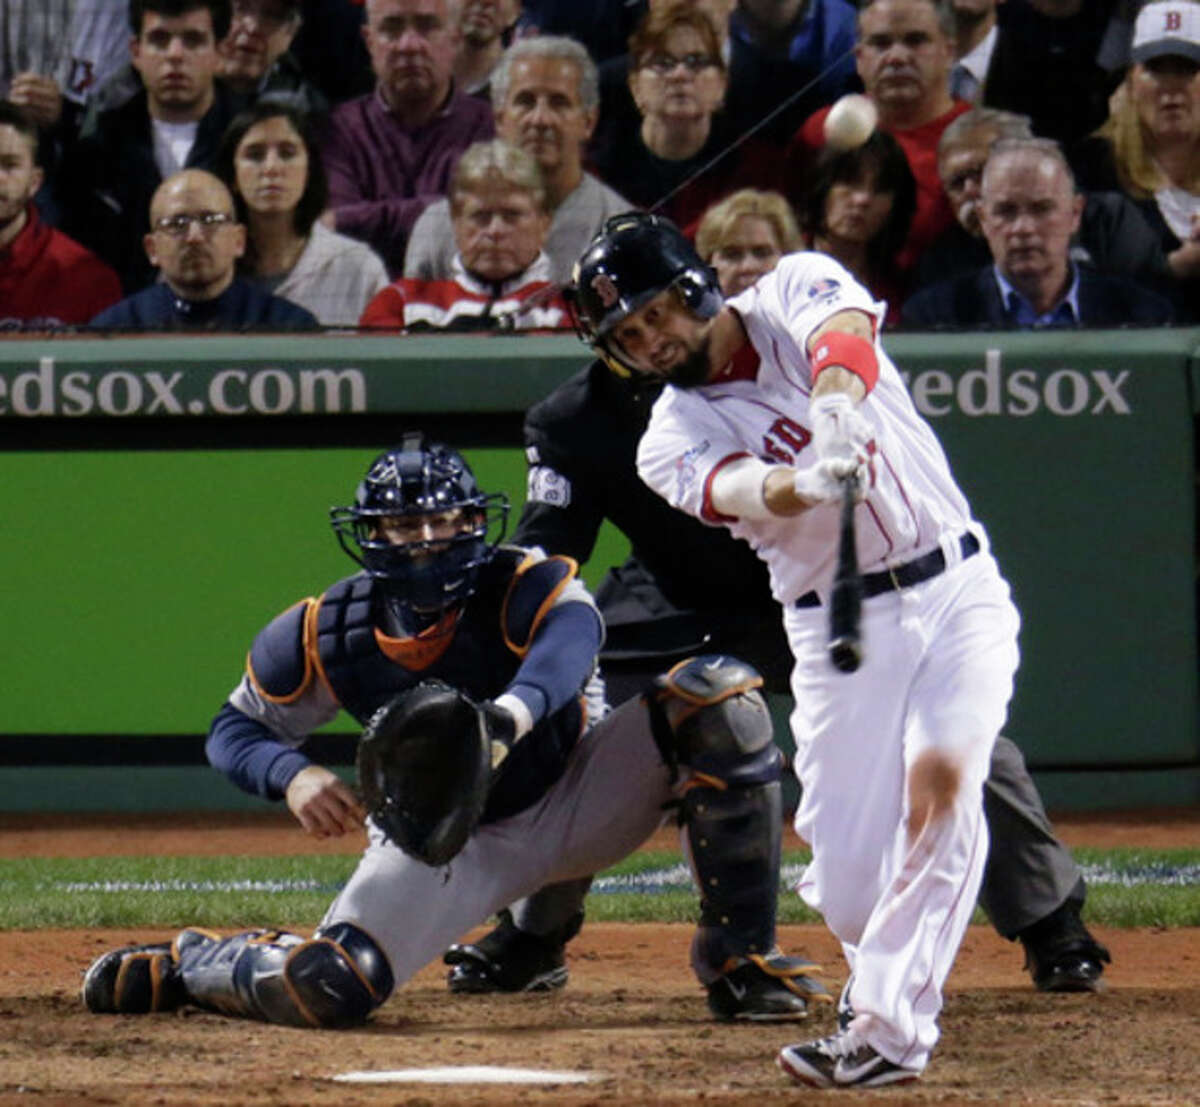 Boston Red Sox's Shane Victorino hits a grand slam against the Detroit Tigers in the seventh inning during Game 6 of the American League baseball championship series on Saturday, Oct. 19, 2013, in Boston. (AP Photo/Charlie Riedel)